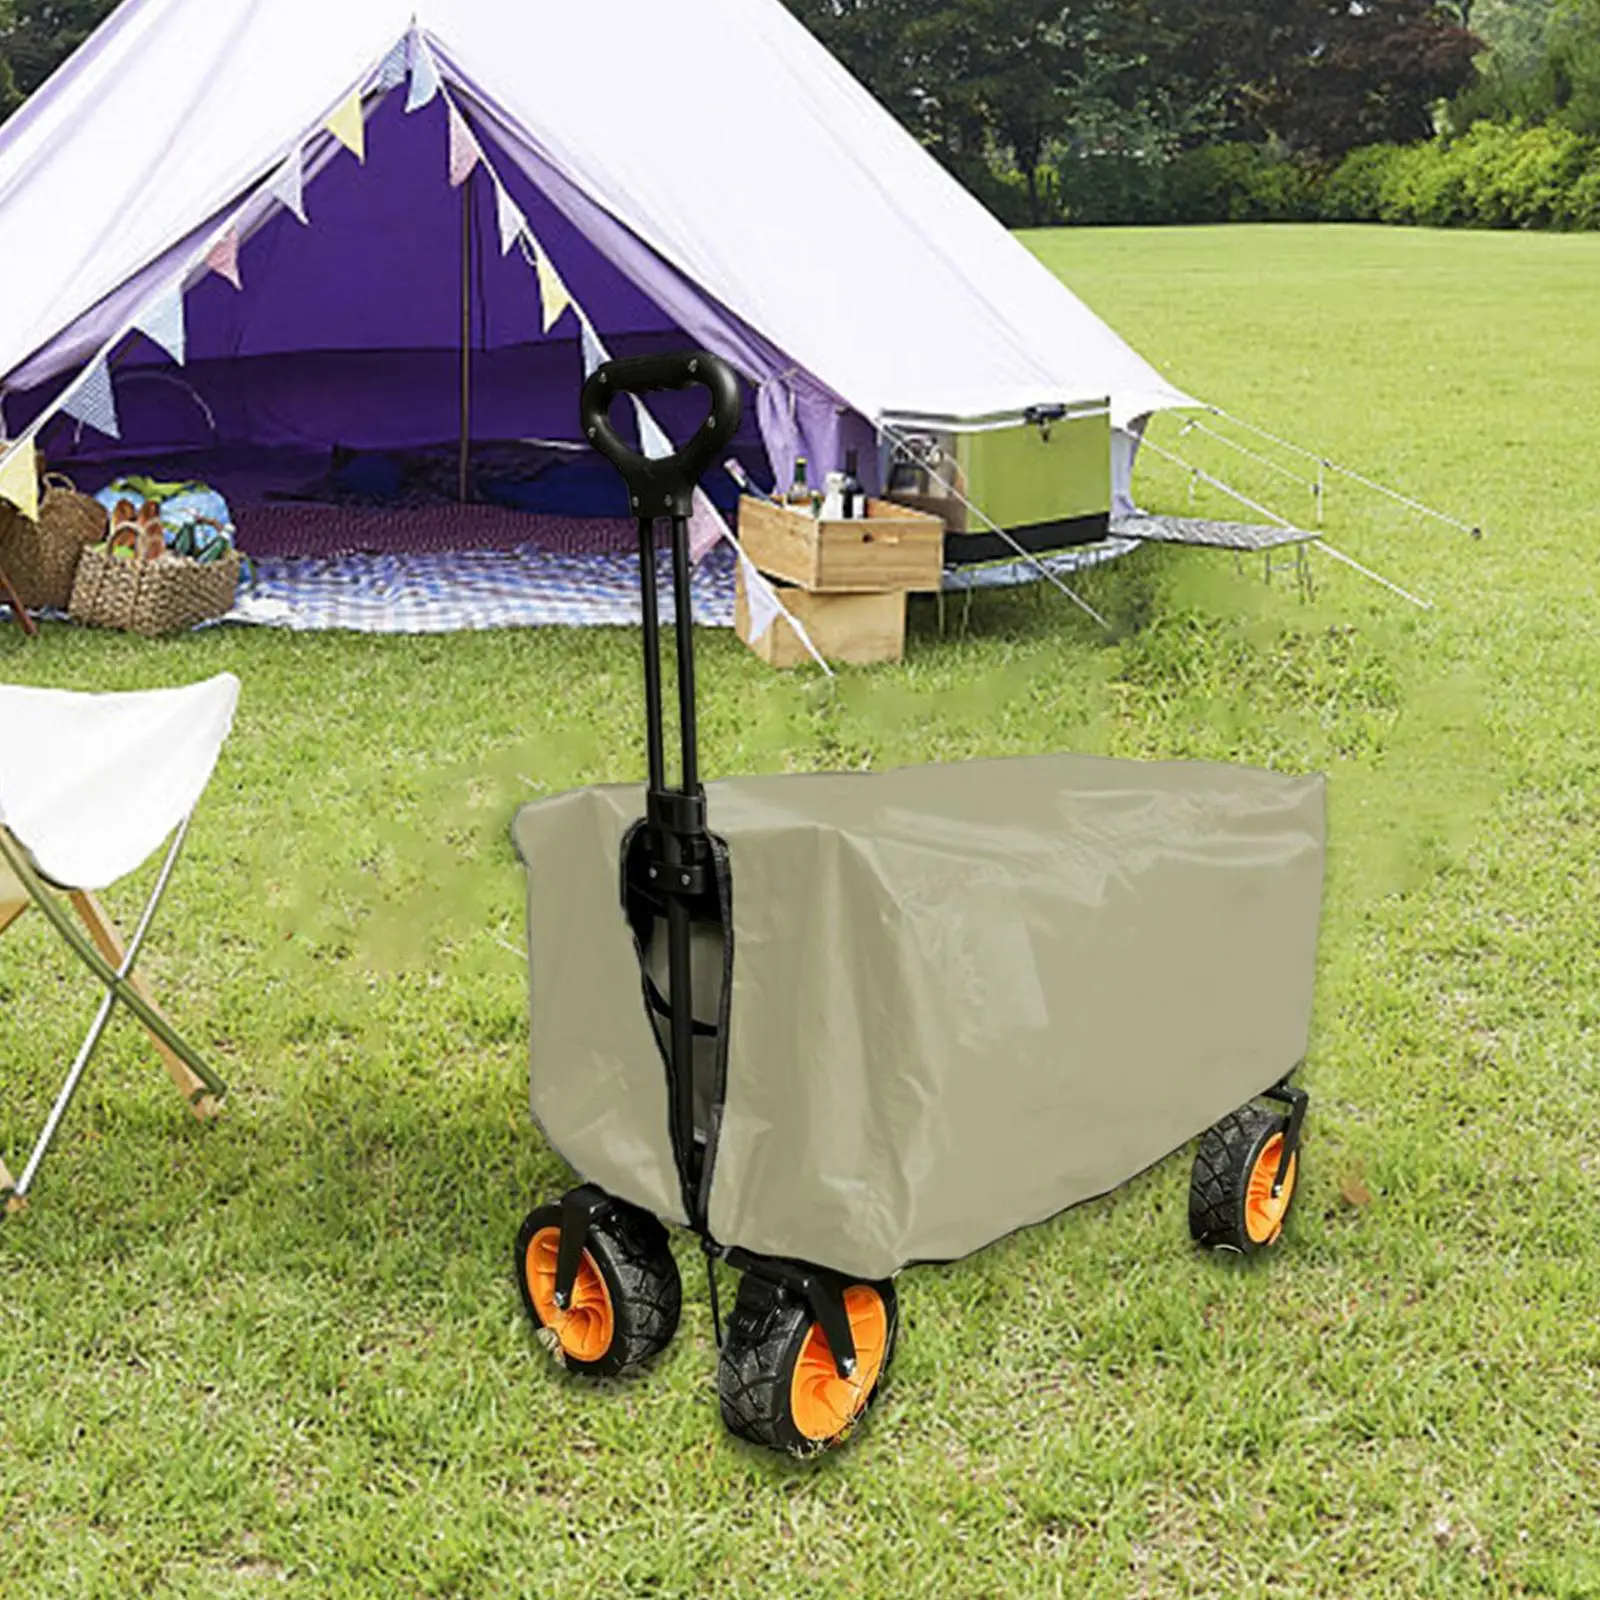 Outdoor Folding Wagon Cover Protective Cover 35x20x18inch Durable Tear Resistant Oxford Cloth for Collapsible Wagon Carts